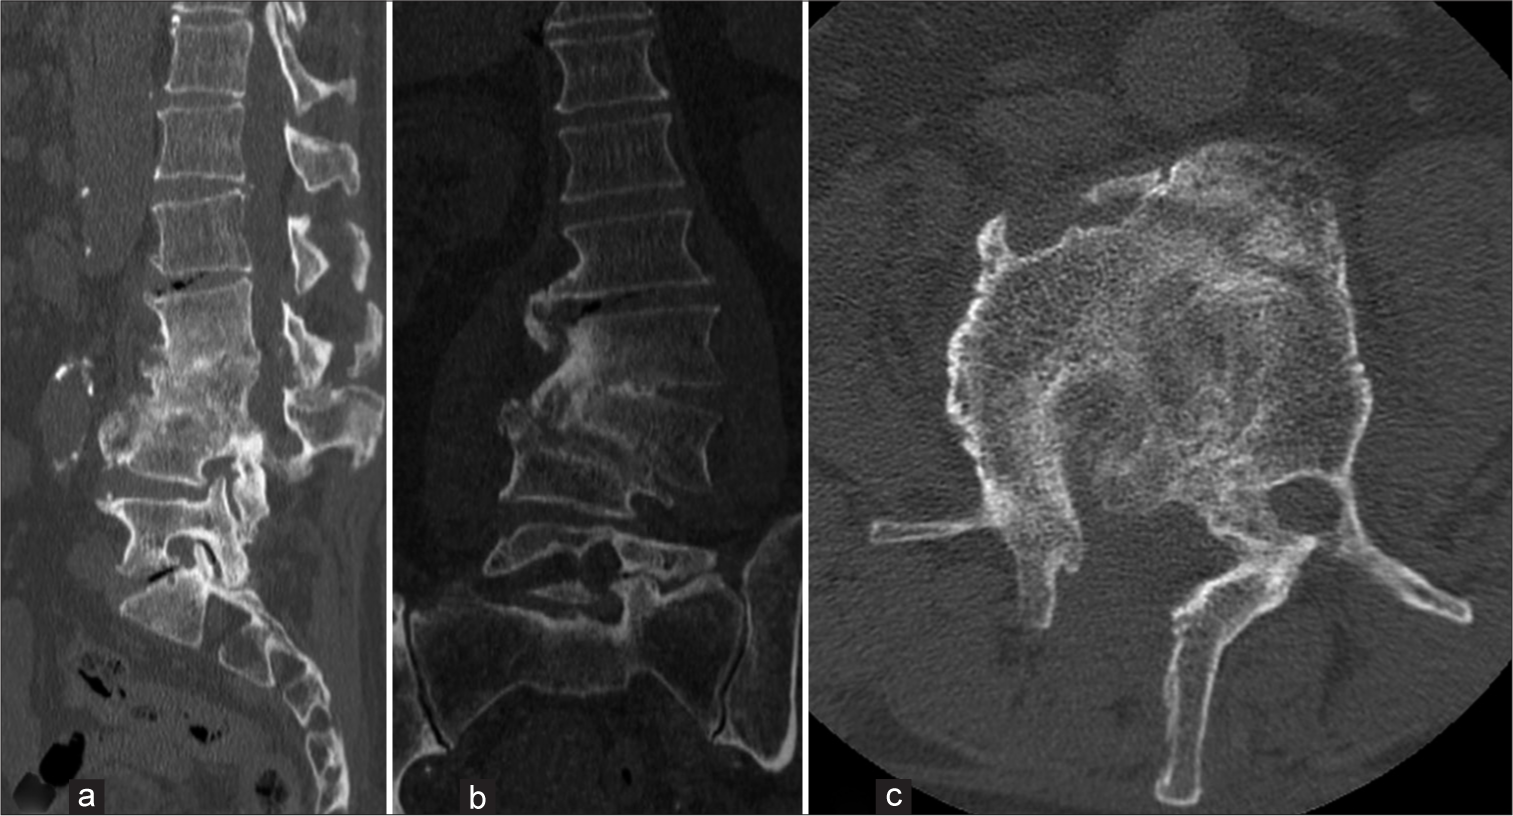 (a) Sagittal, (b) coronal, and (c) axial computed tomography scan images at 12 months follow-up, showing vertebral fusion of L2-L3-L4.